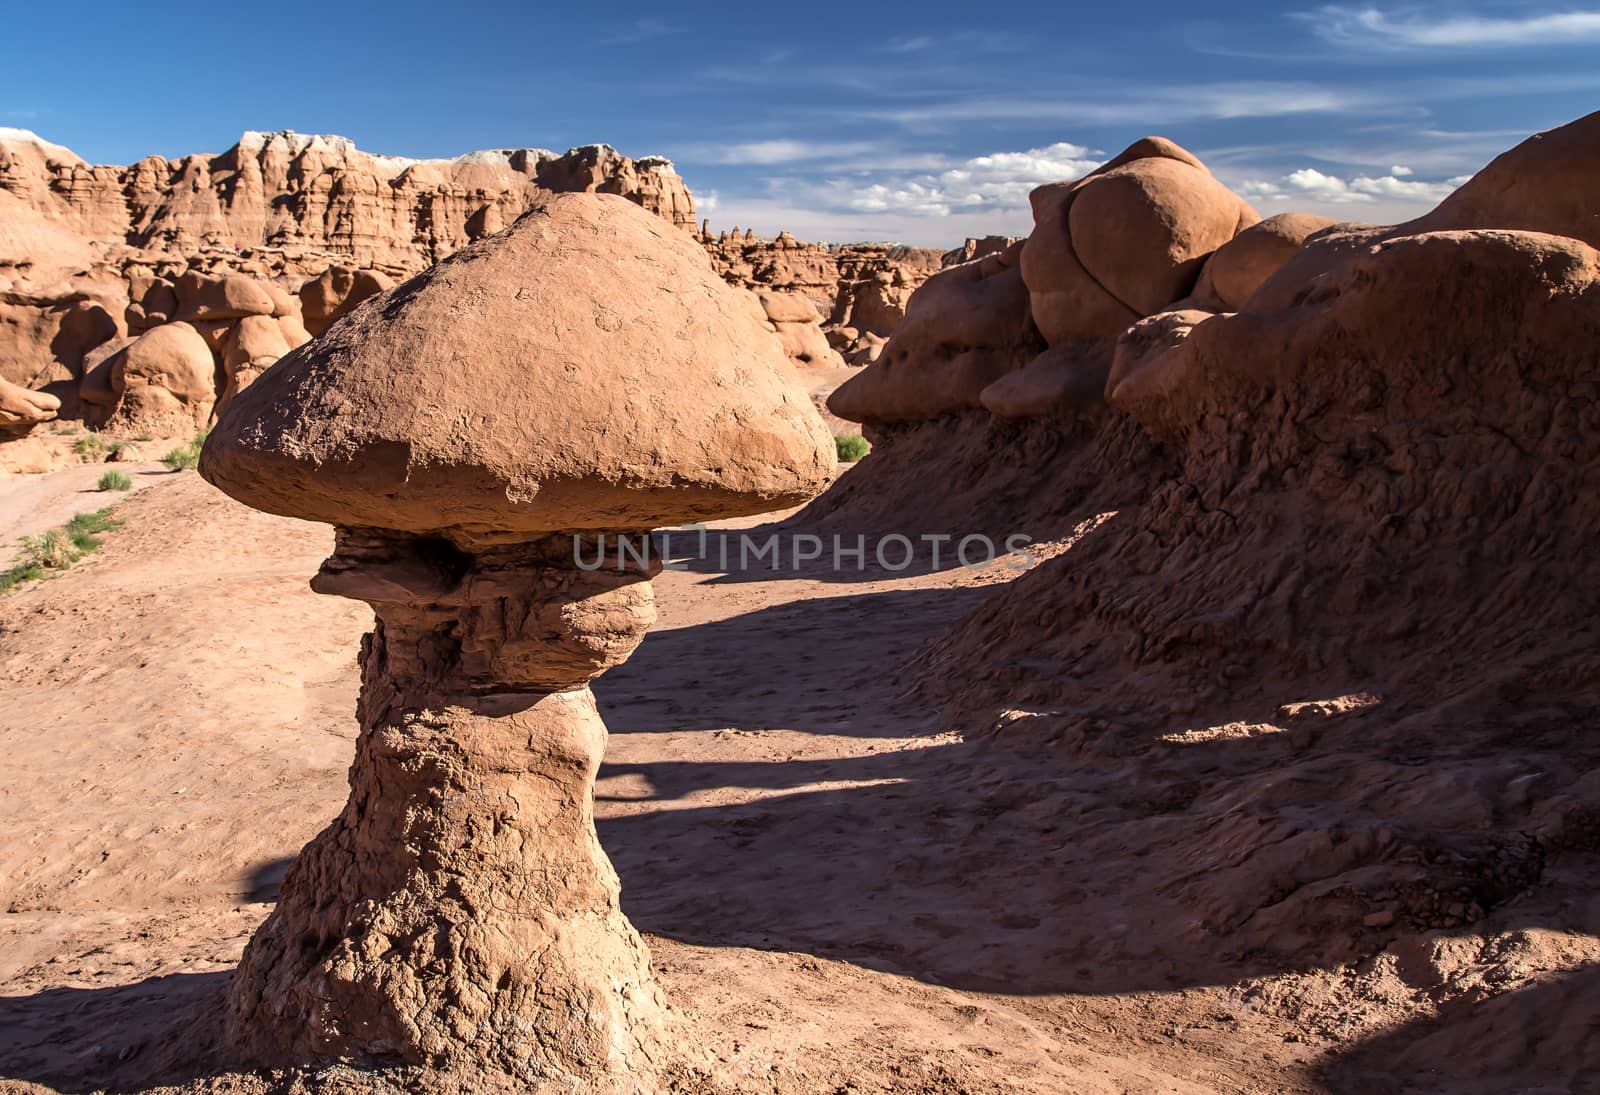 Rock formation called a "goblin" at Goblin Valley State Park, Utah.